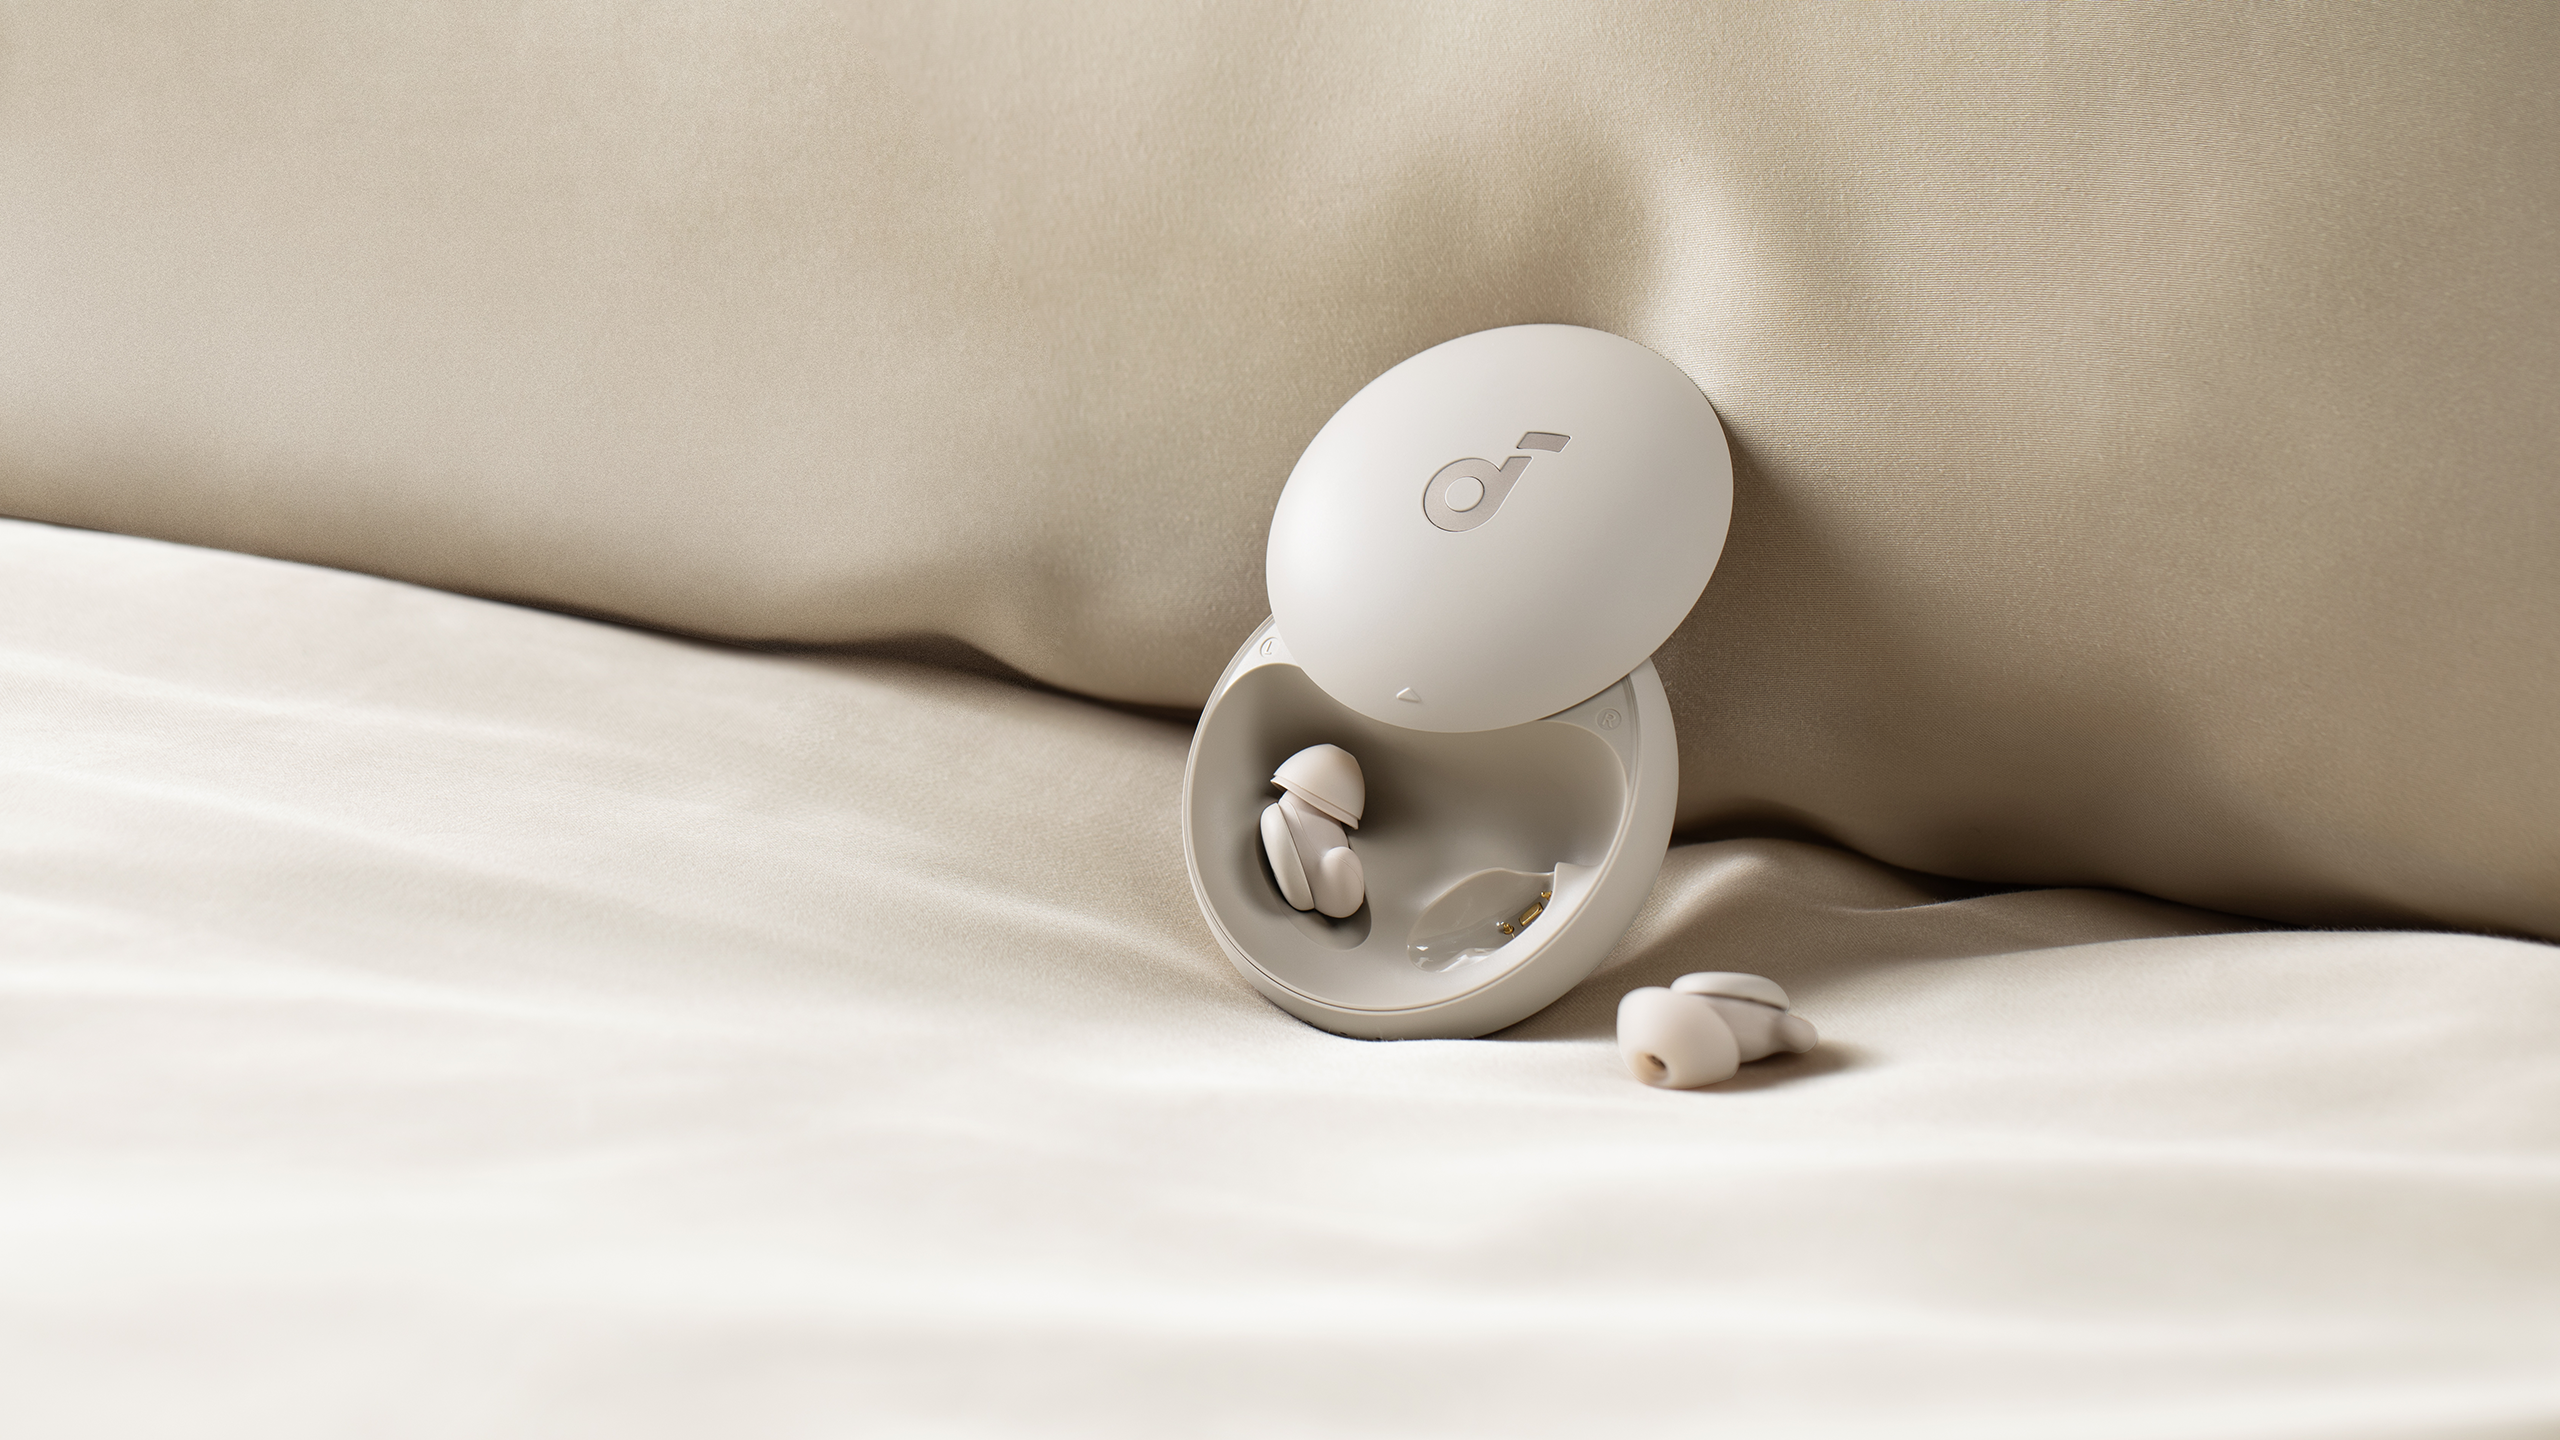 soundcore Sleep A20 earbuds on bed